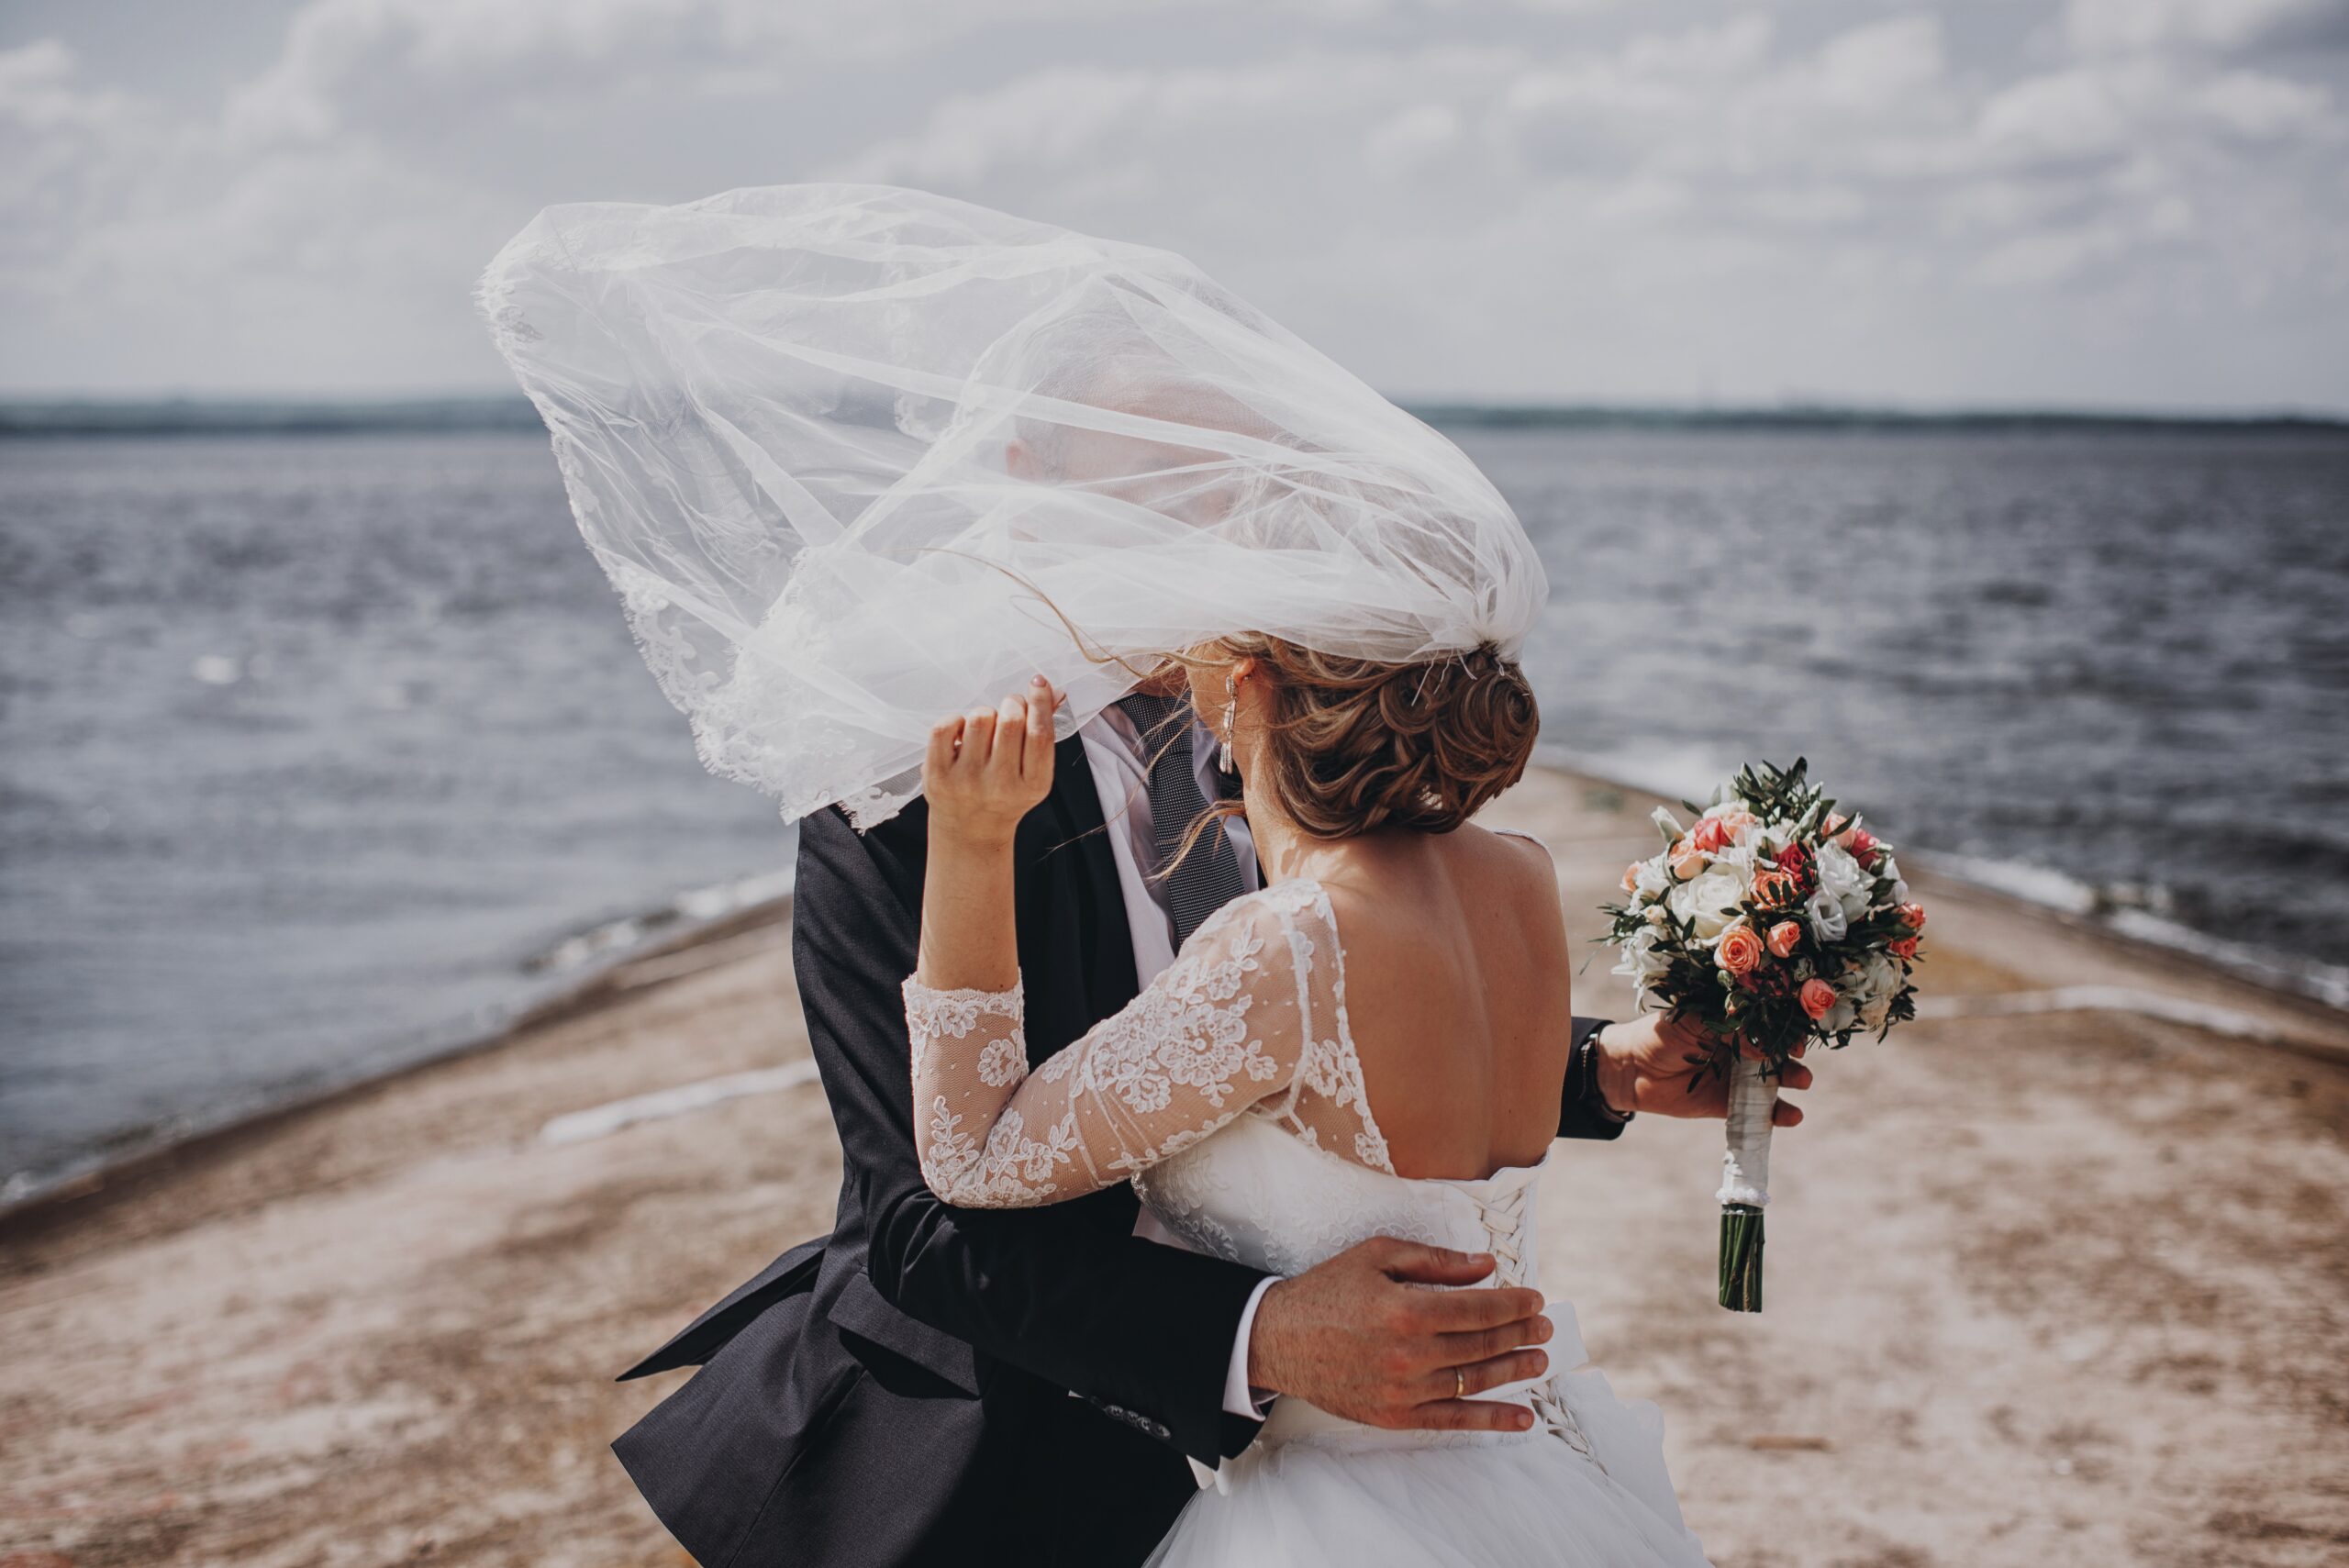 Can You Get A Loan For A Wedding? | Oceania Finance